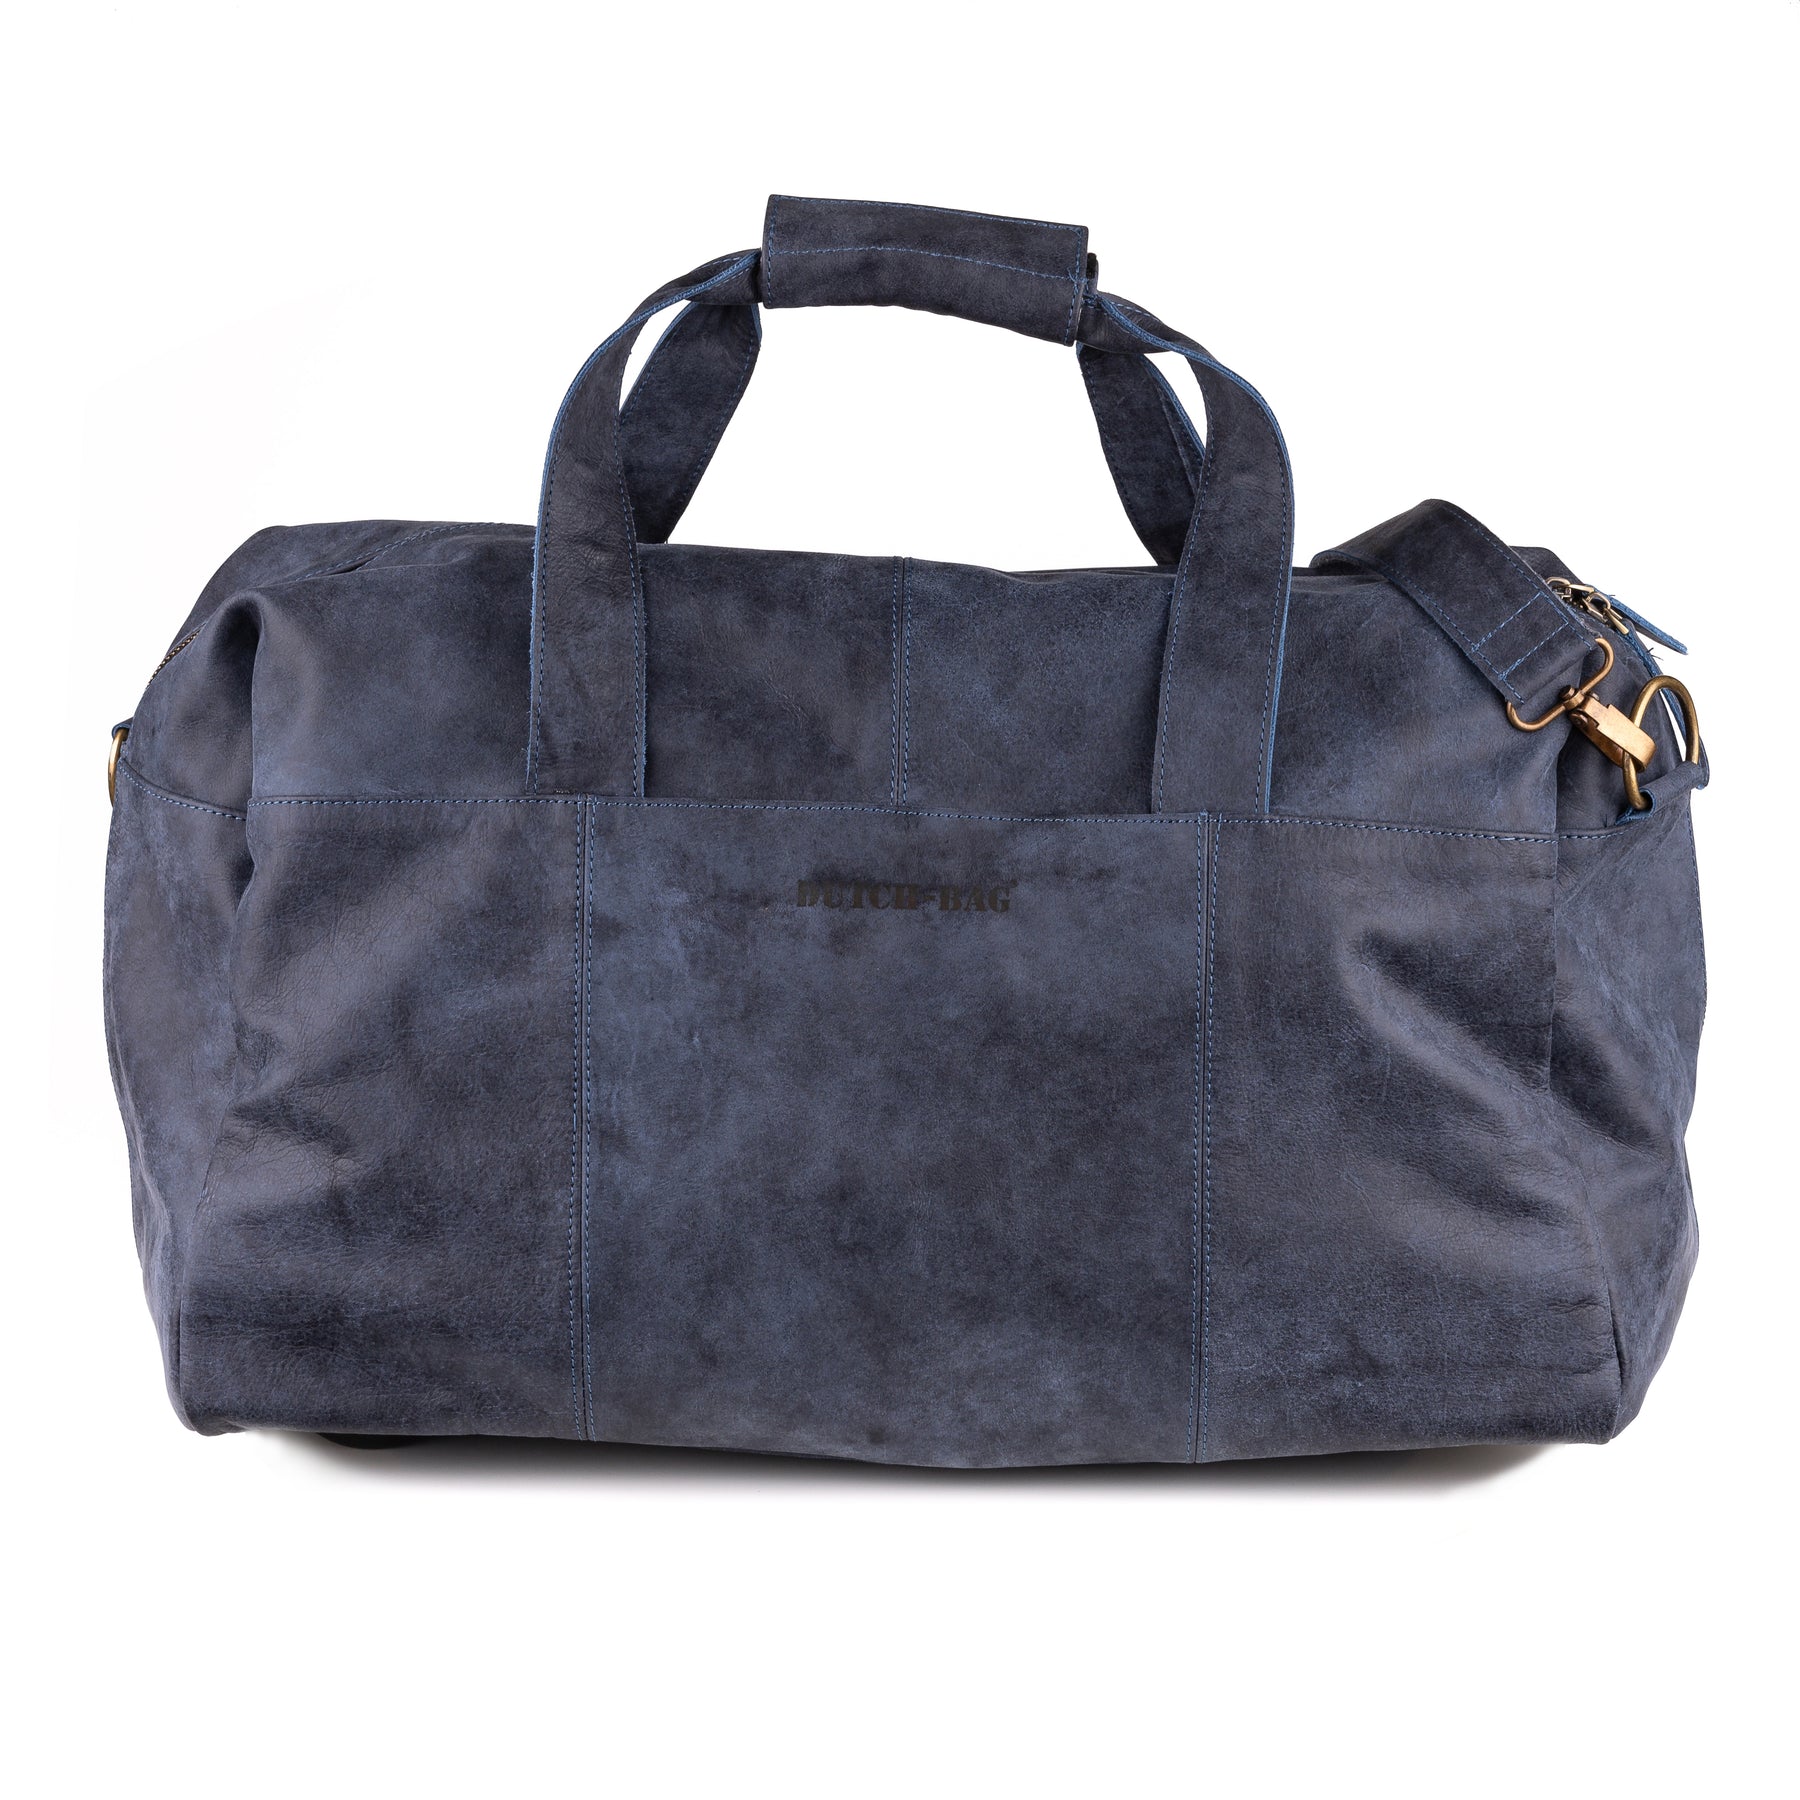 Zwolle Leather Weekend Bag Denim Blue - Concrete Leather